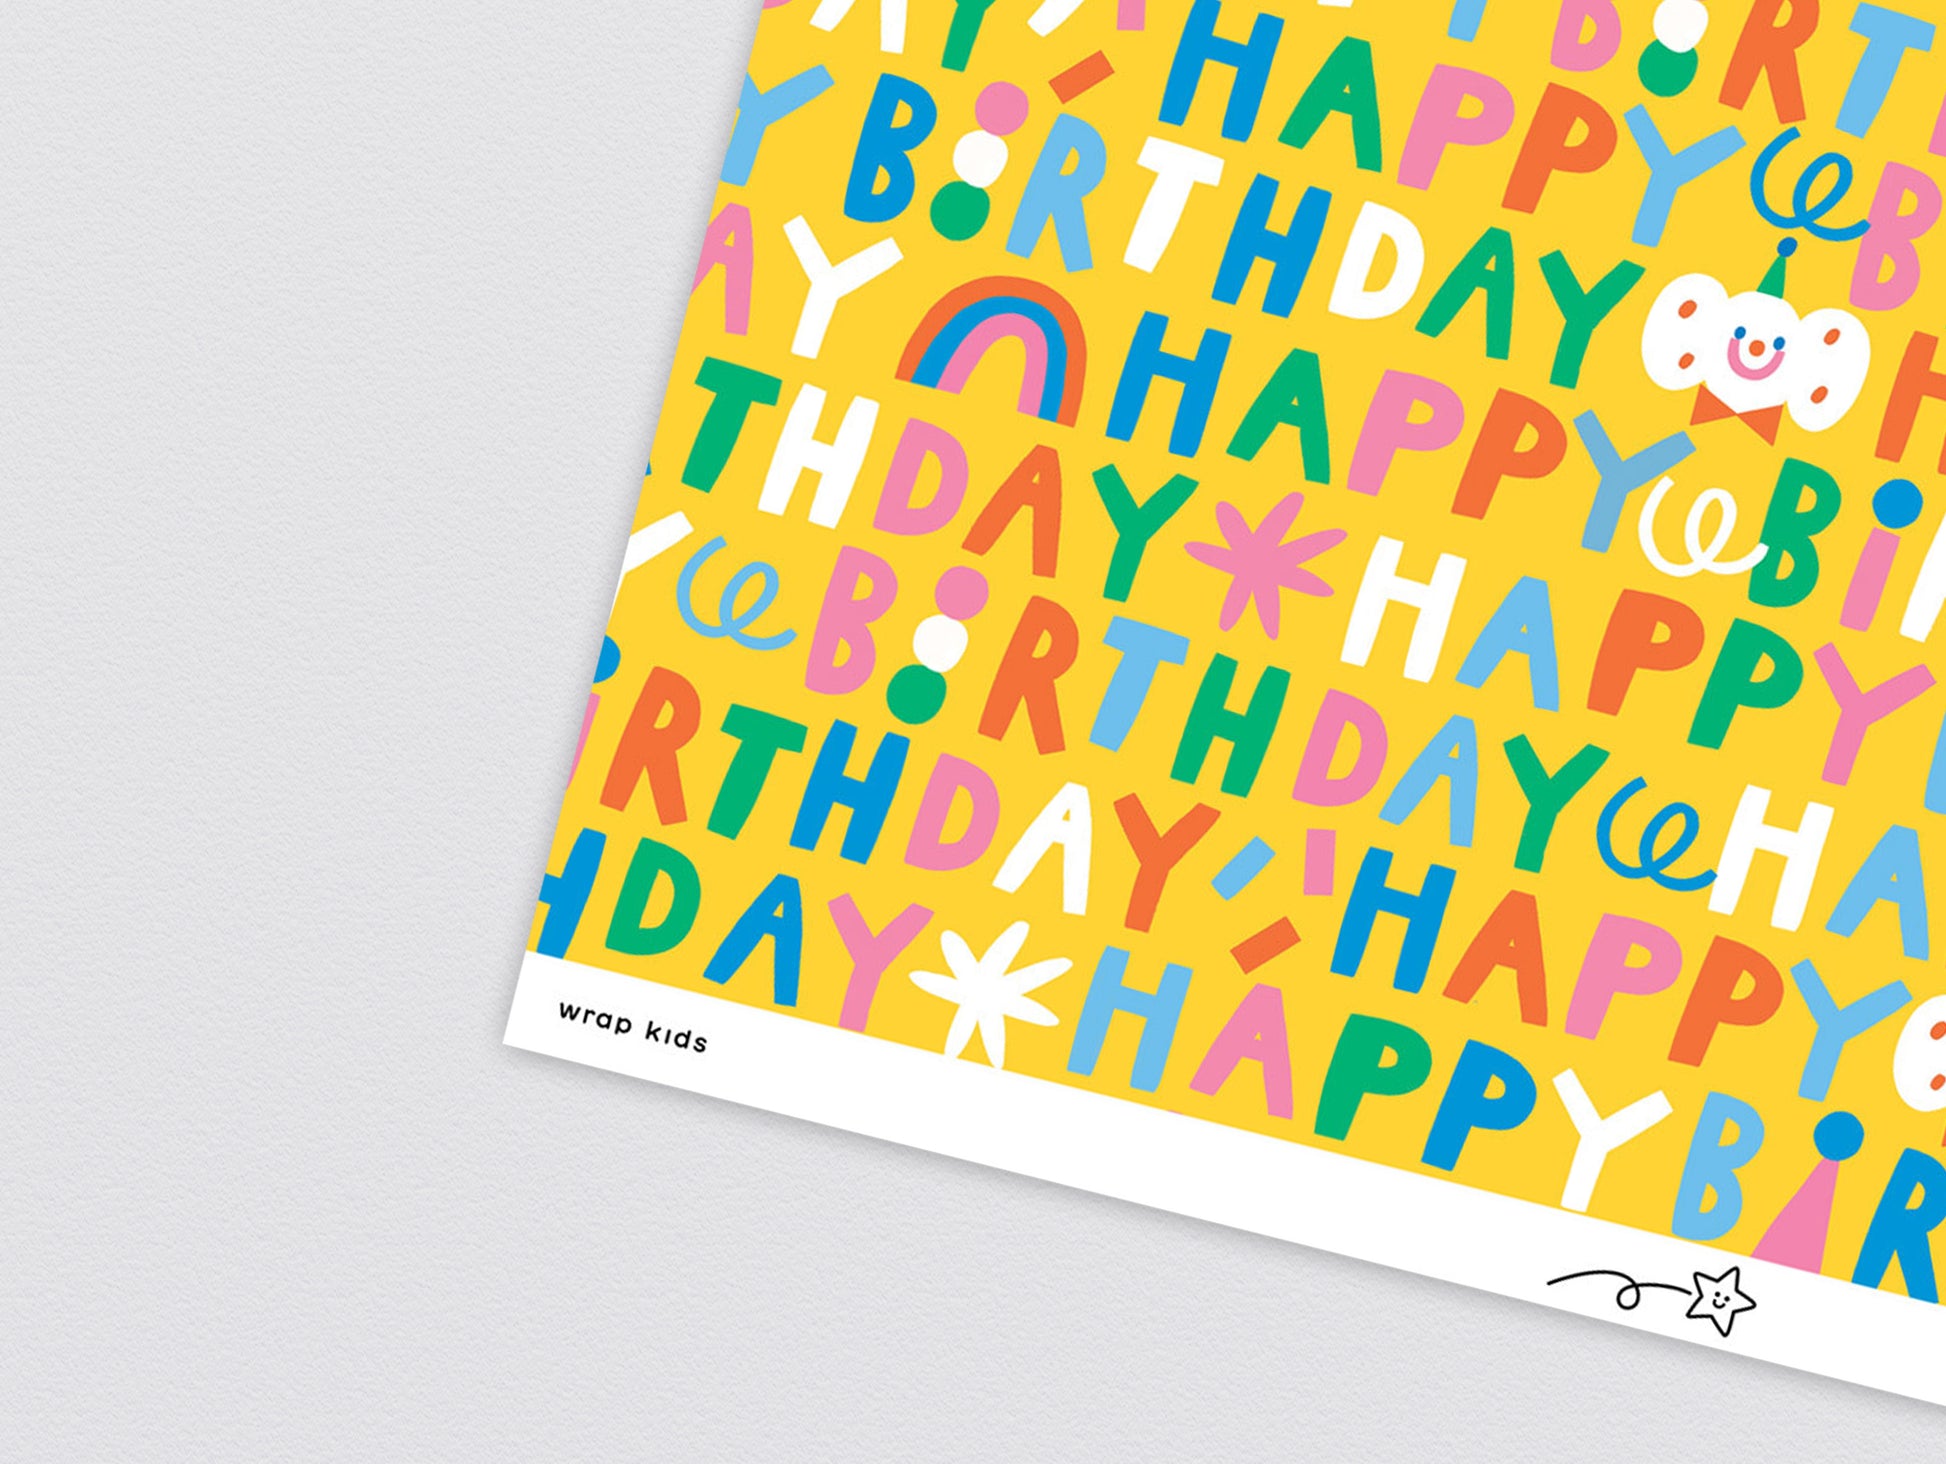 Happy Birthday Wrapping Paper x 3 Sheets by Wrap Stationery